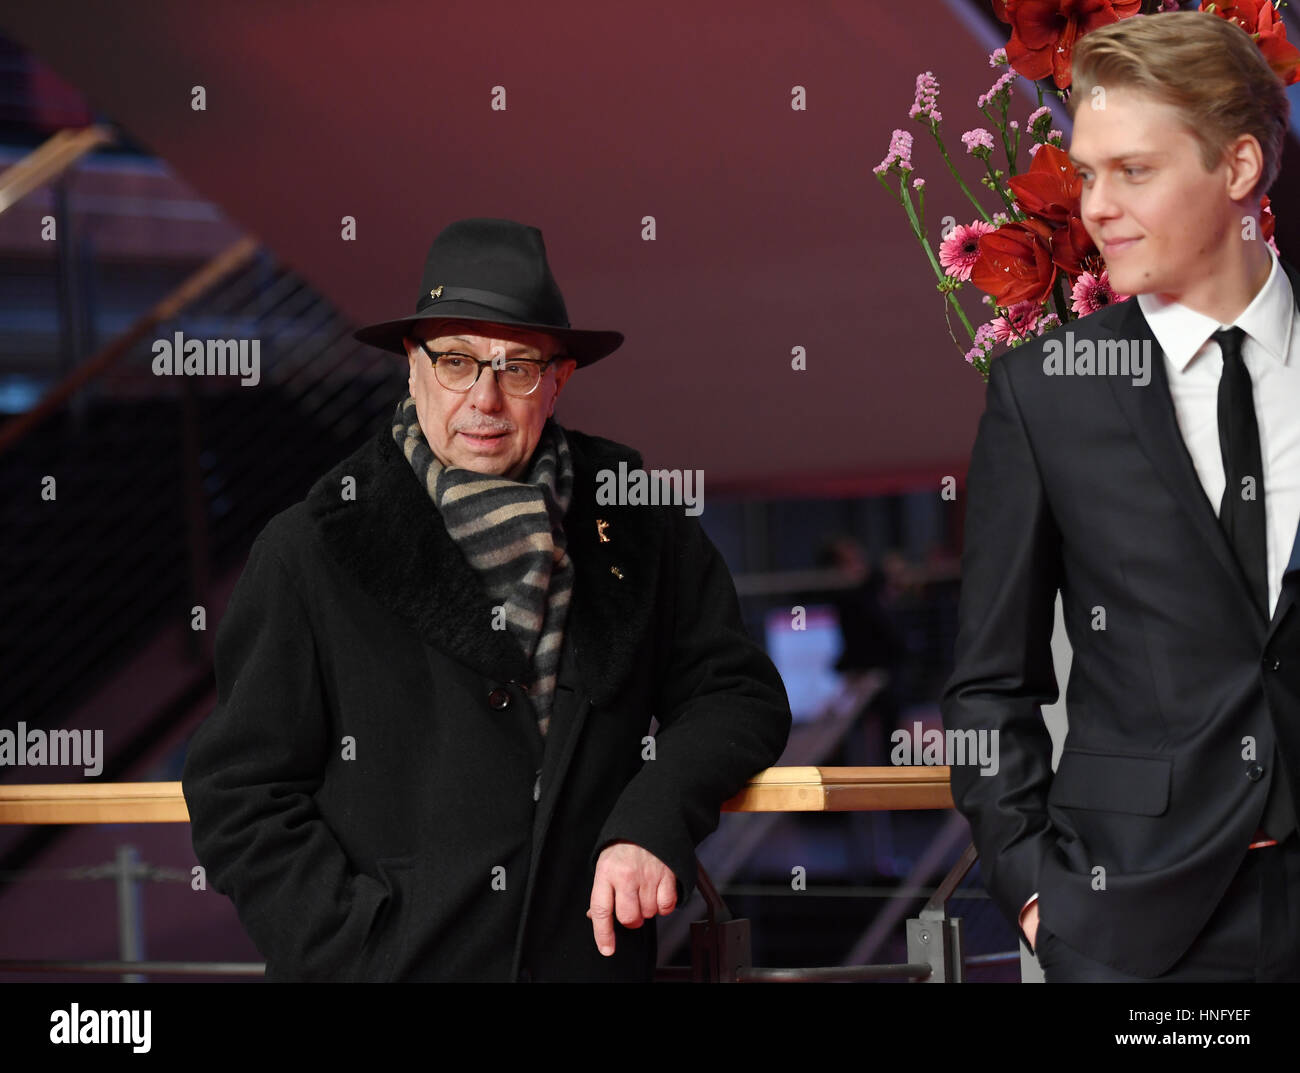 Berlin, Germany. 12th Feb, 2017. Actor Jakub Gierszal (r) and Berlinale Director Dieter Kosslick on the red carpet for the film 'Pokot (Spoor)' during the 67th International Berlin Film Festival, Berlinale, in Berlin, Germany, 12 February 2017. The film, a Polish- German- Czech- Swedish- Slovakian co-production, is part of the competition at the Berlinale festival. Photo: Jens Kalaene/dpa/Alamy Live News Stock Photo